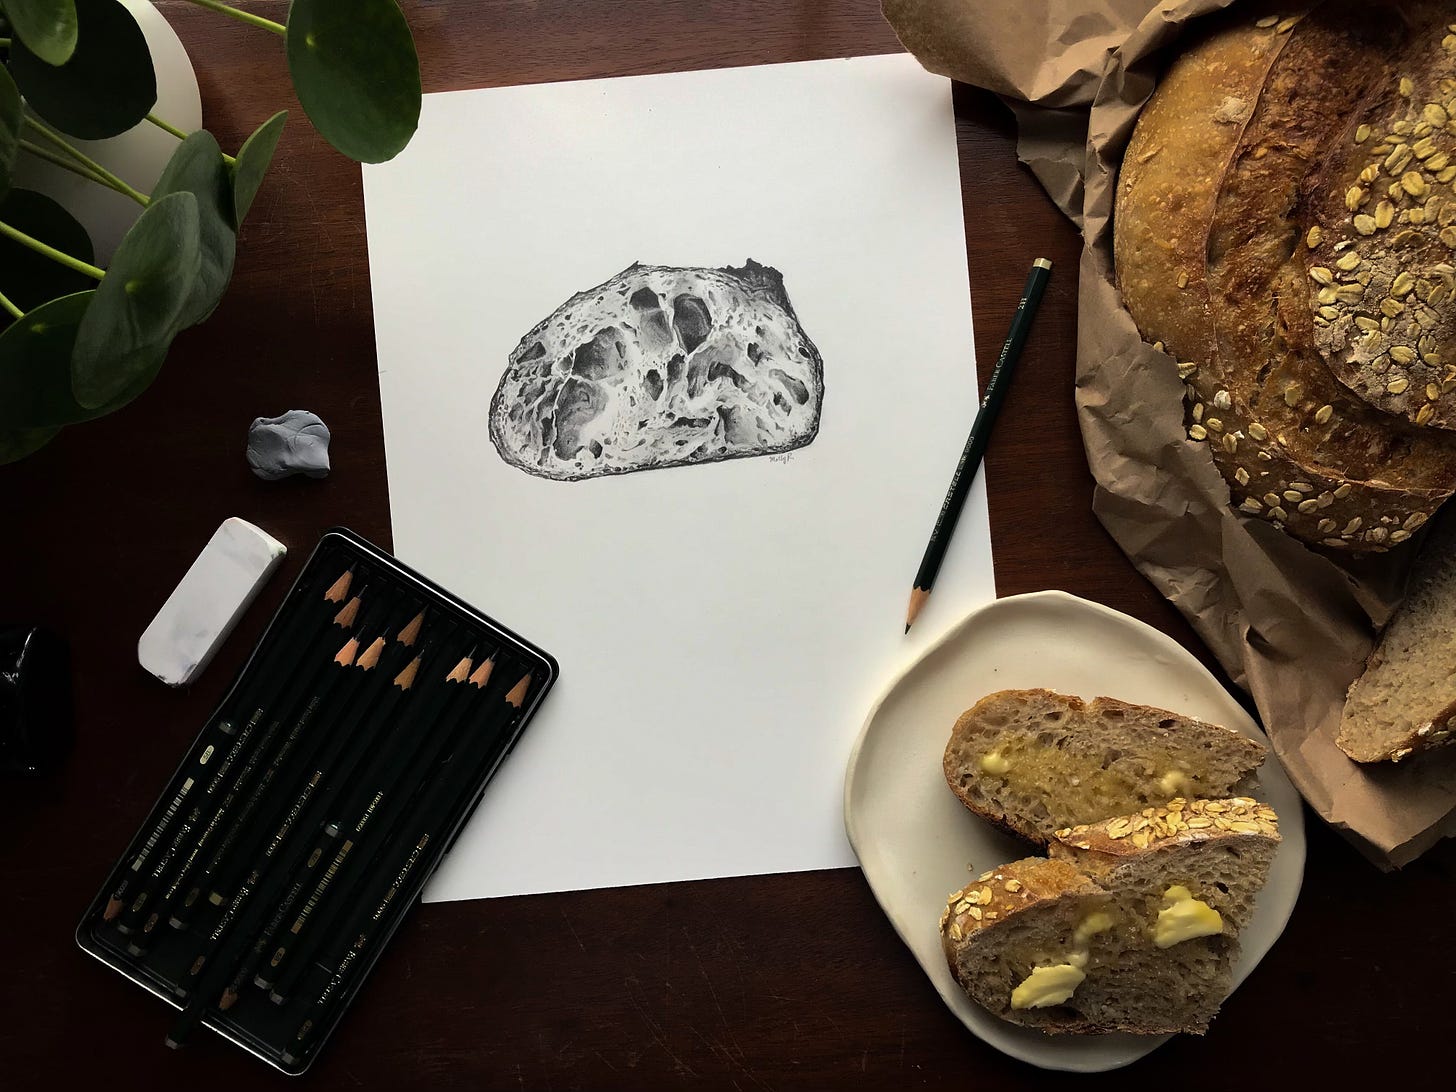 A shot of the finished drawing with a loaf of bread to the right of it, pencils below and a plant to the top left corner. 